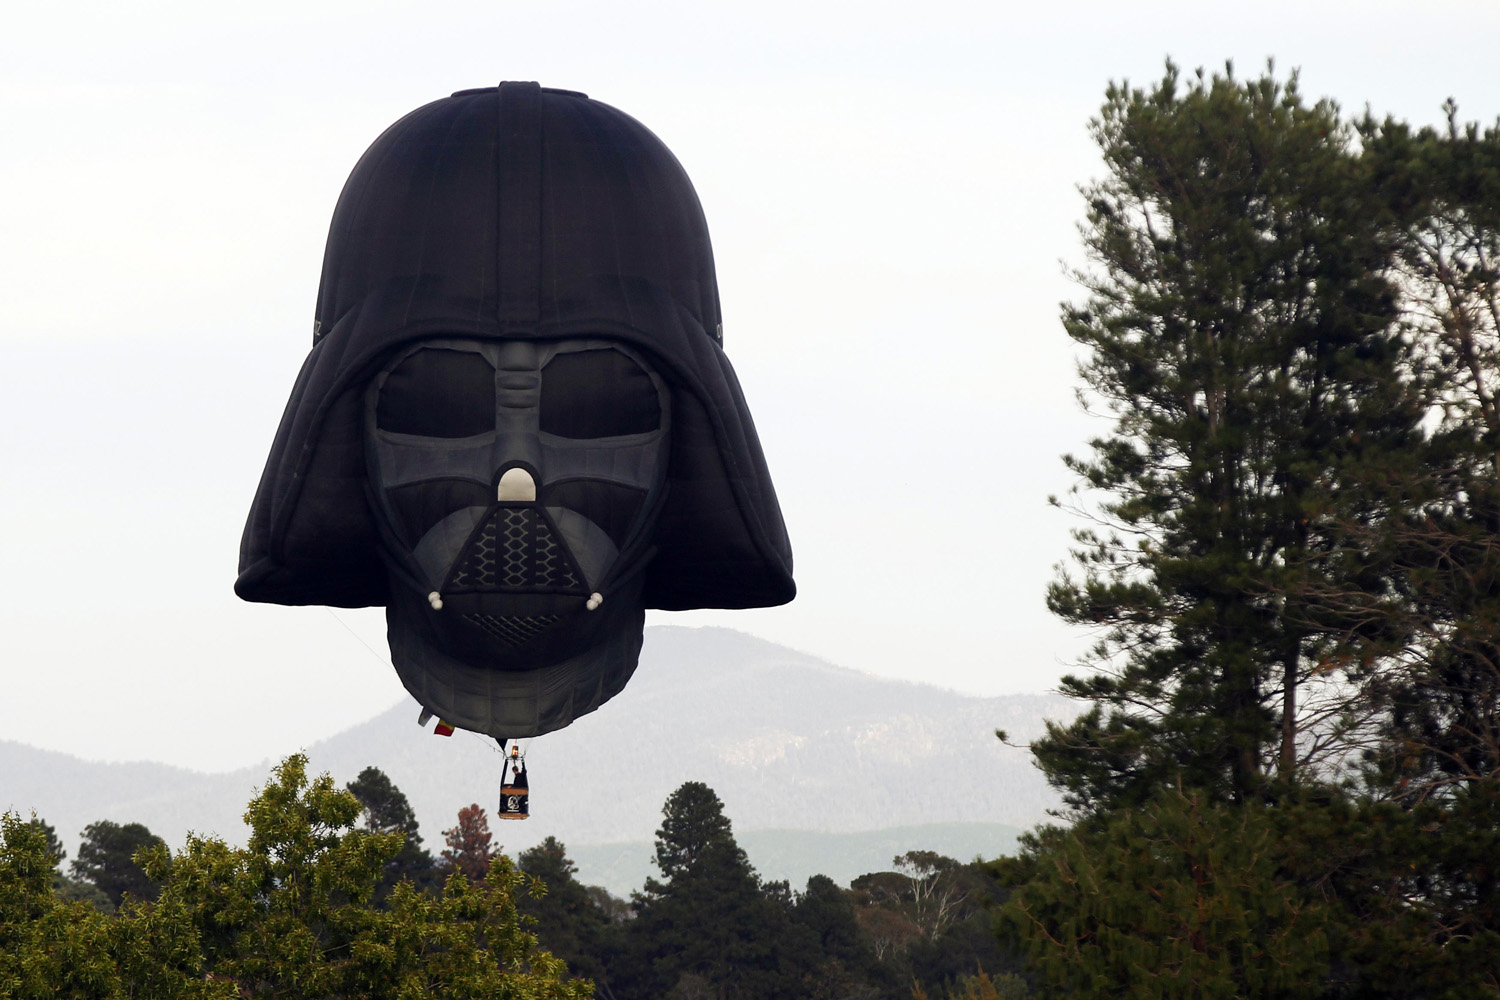 Hot air balloon shaped like Darth Vader's head lands after a sunrise flight in Canberra